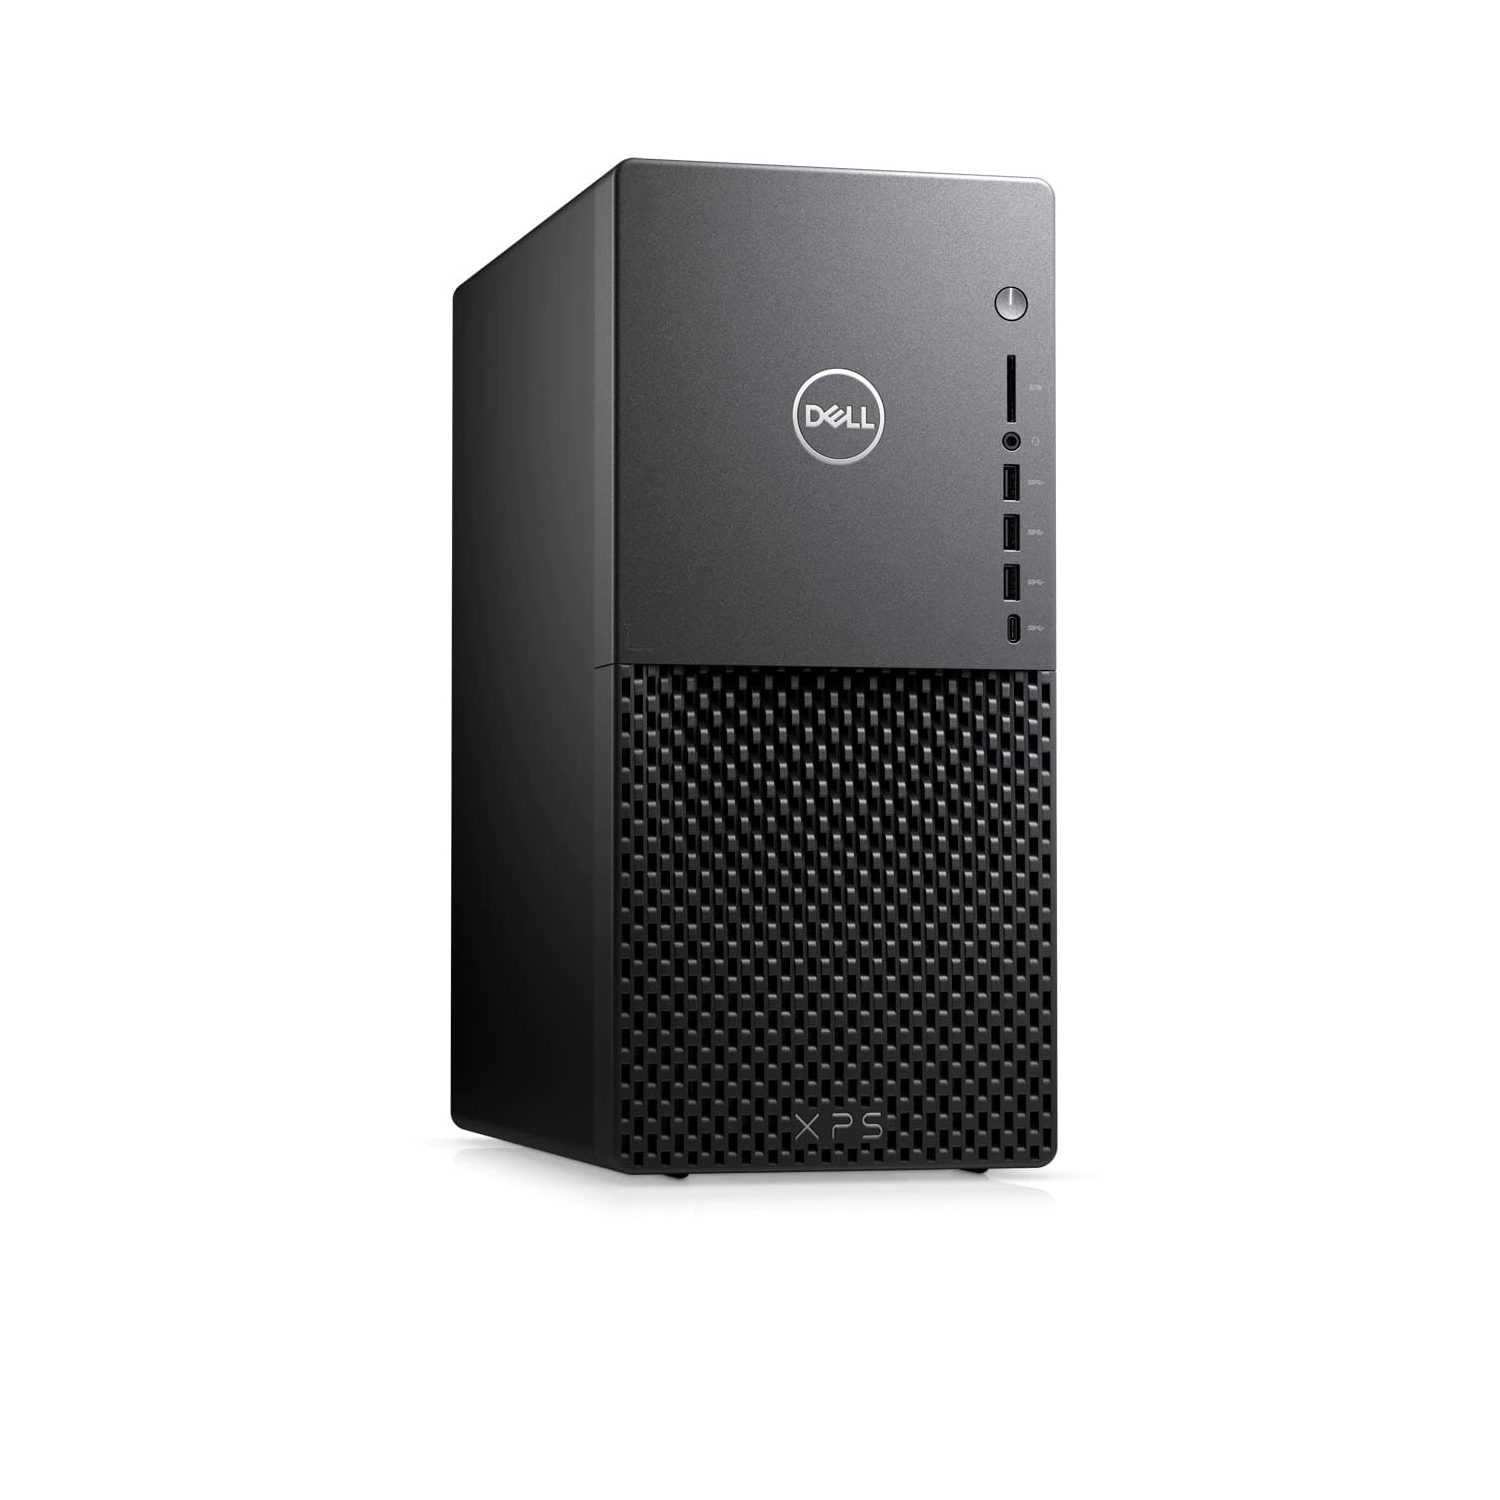 Refurbished (Excellent) - Dell XPS 8940 Desktop (2020) | Core i5 - 1TB SSD + 1TB HDD - 16GB RAM - 1660 Ti | 6 Cores @ 4.3 GHz - 10th Gen CPU Certified Refurbished